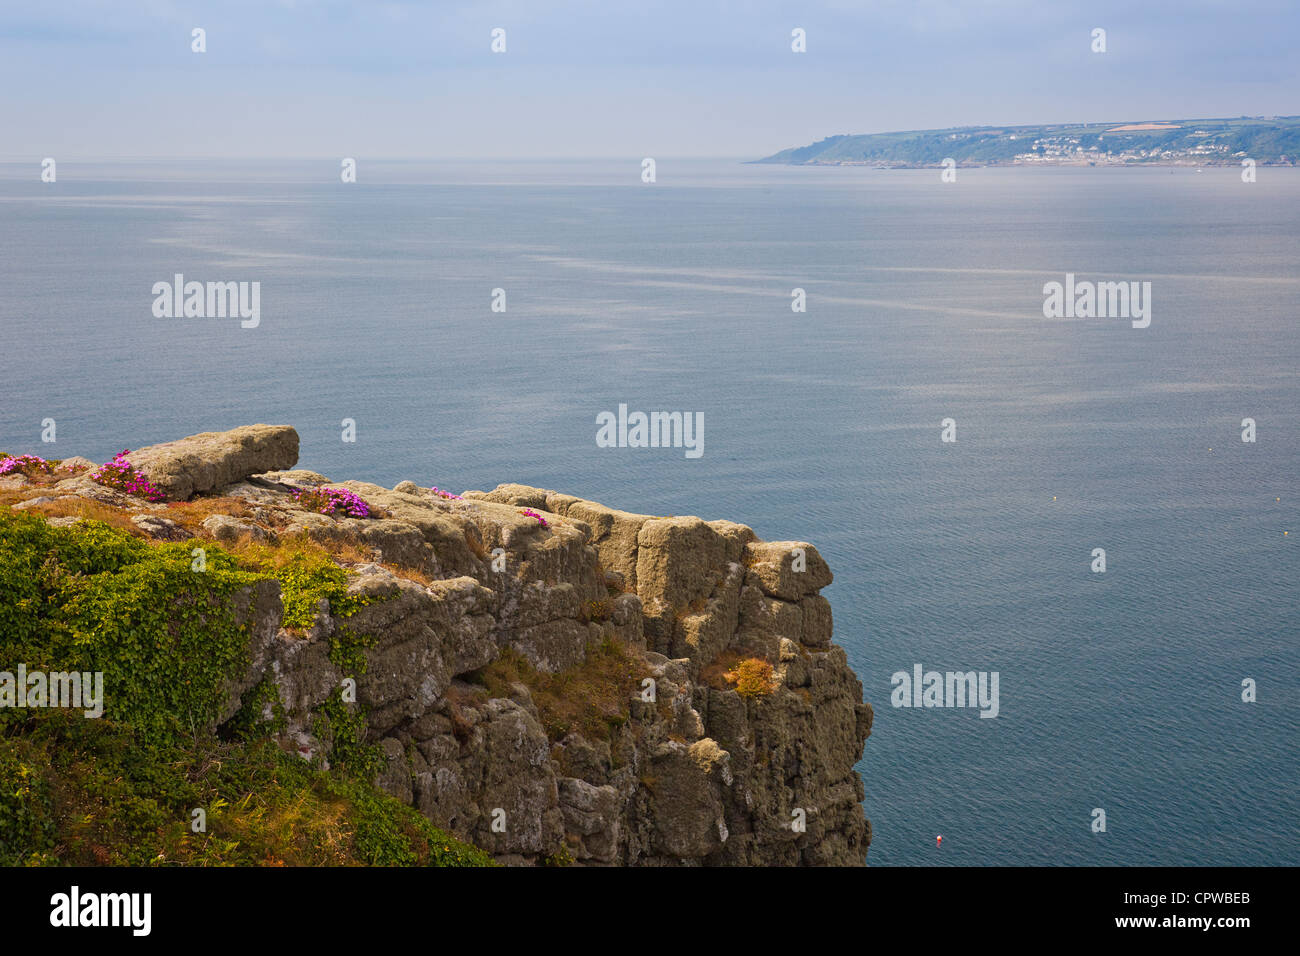 Cliff top mesembryanthemum flowers and the Cornish coastline from the summit of St Michael's Mount Marazion Cornwall England UK Stock Photo